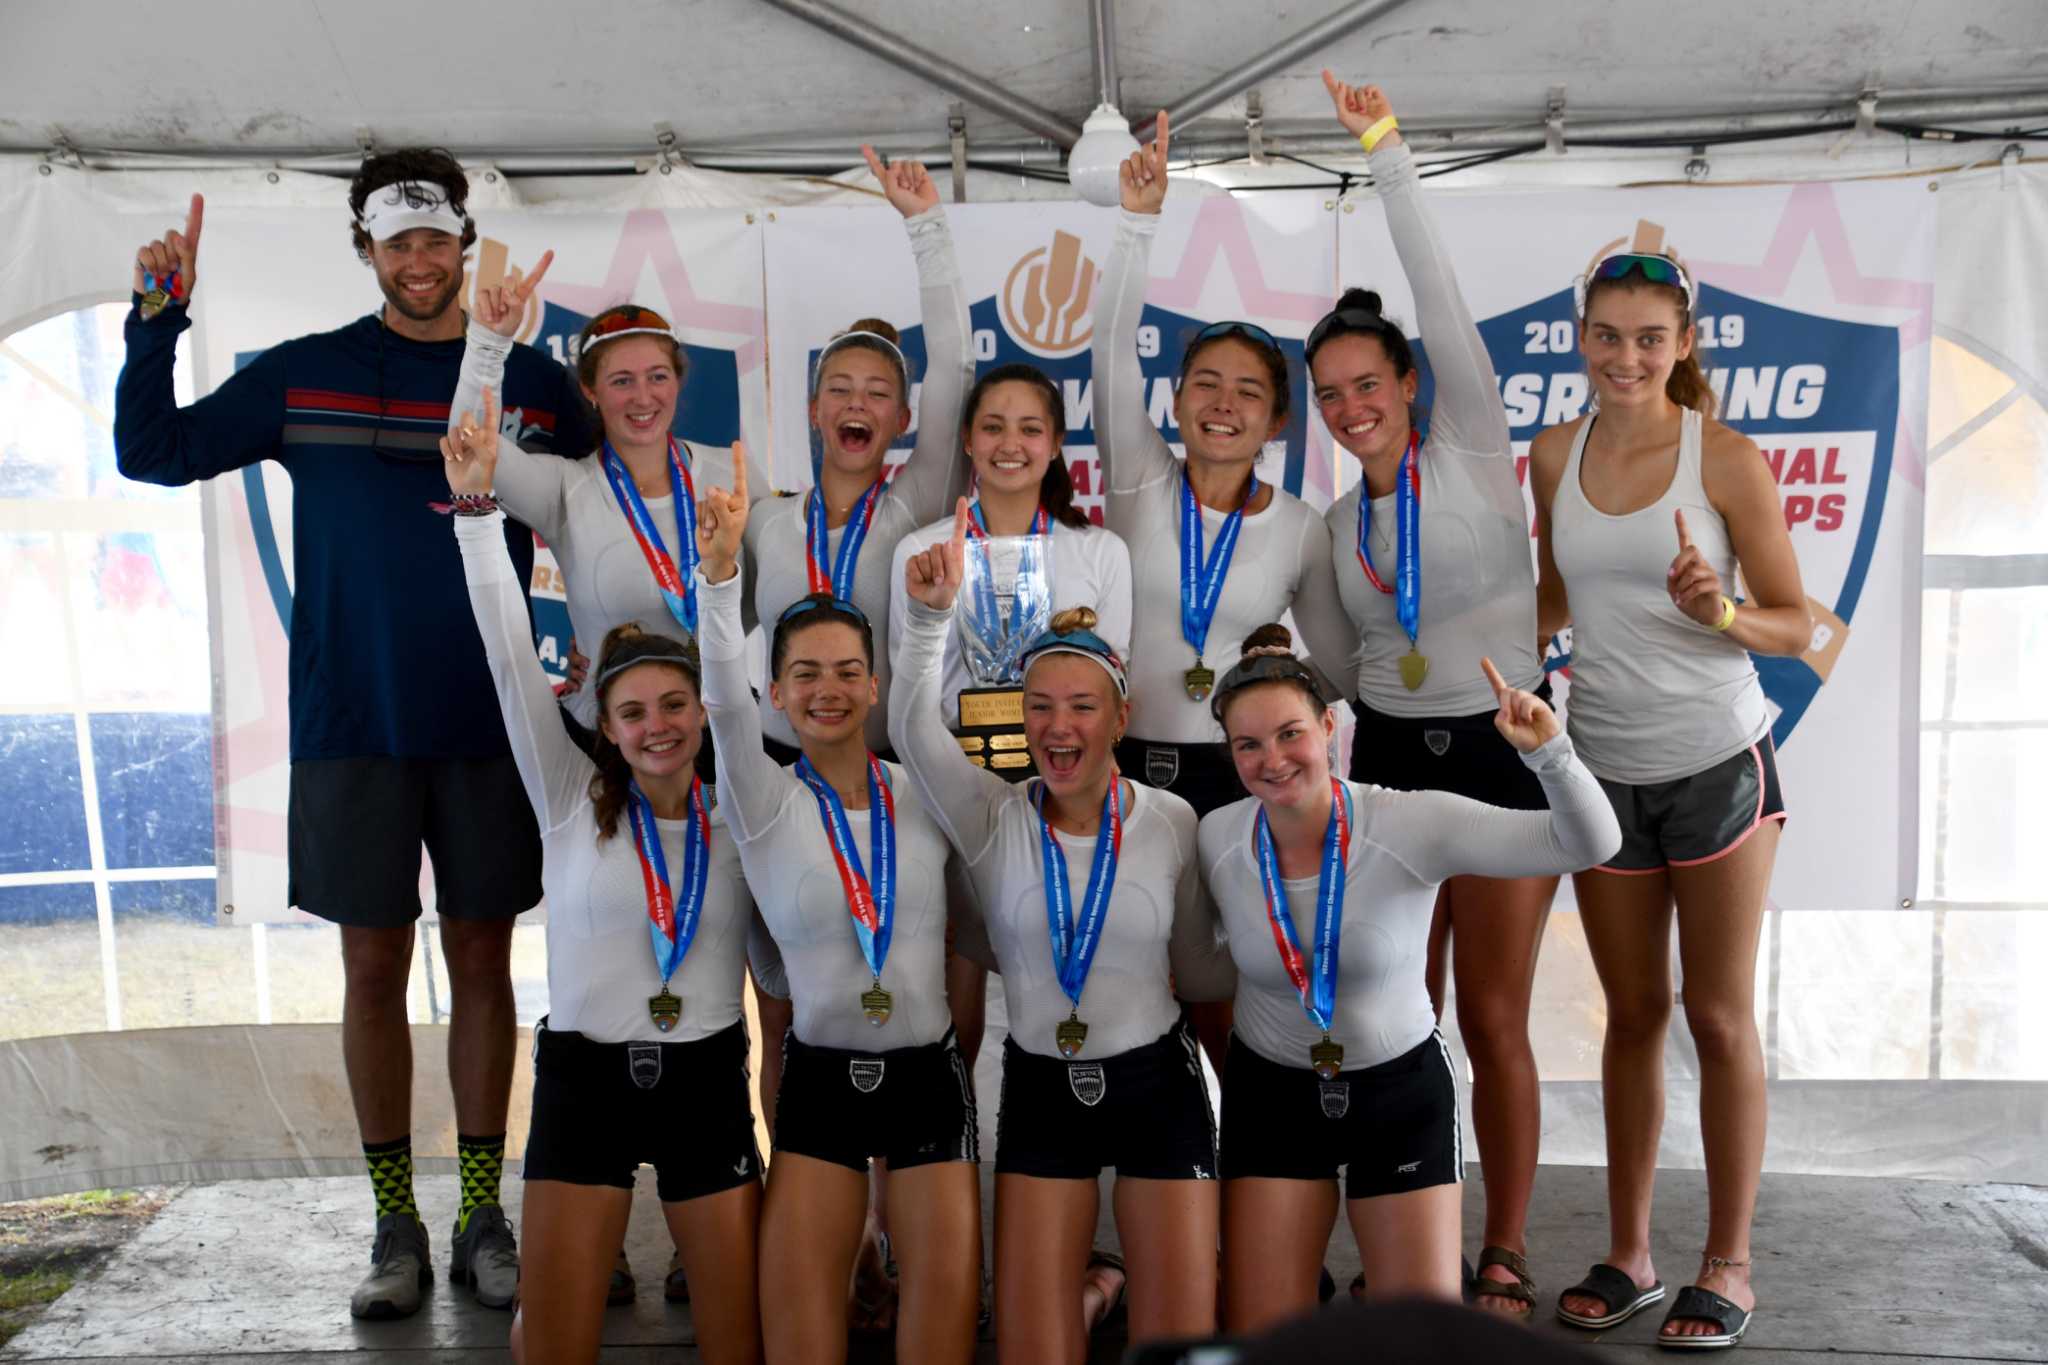 Saugatuck Rowing Club wins 5th straight national title